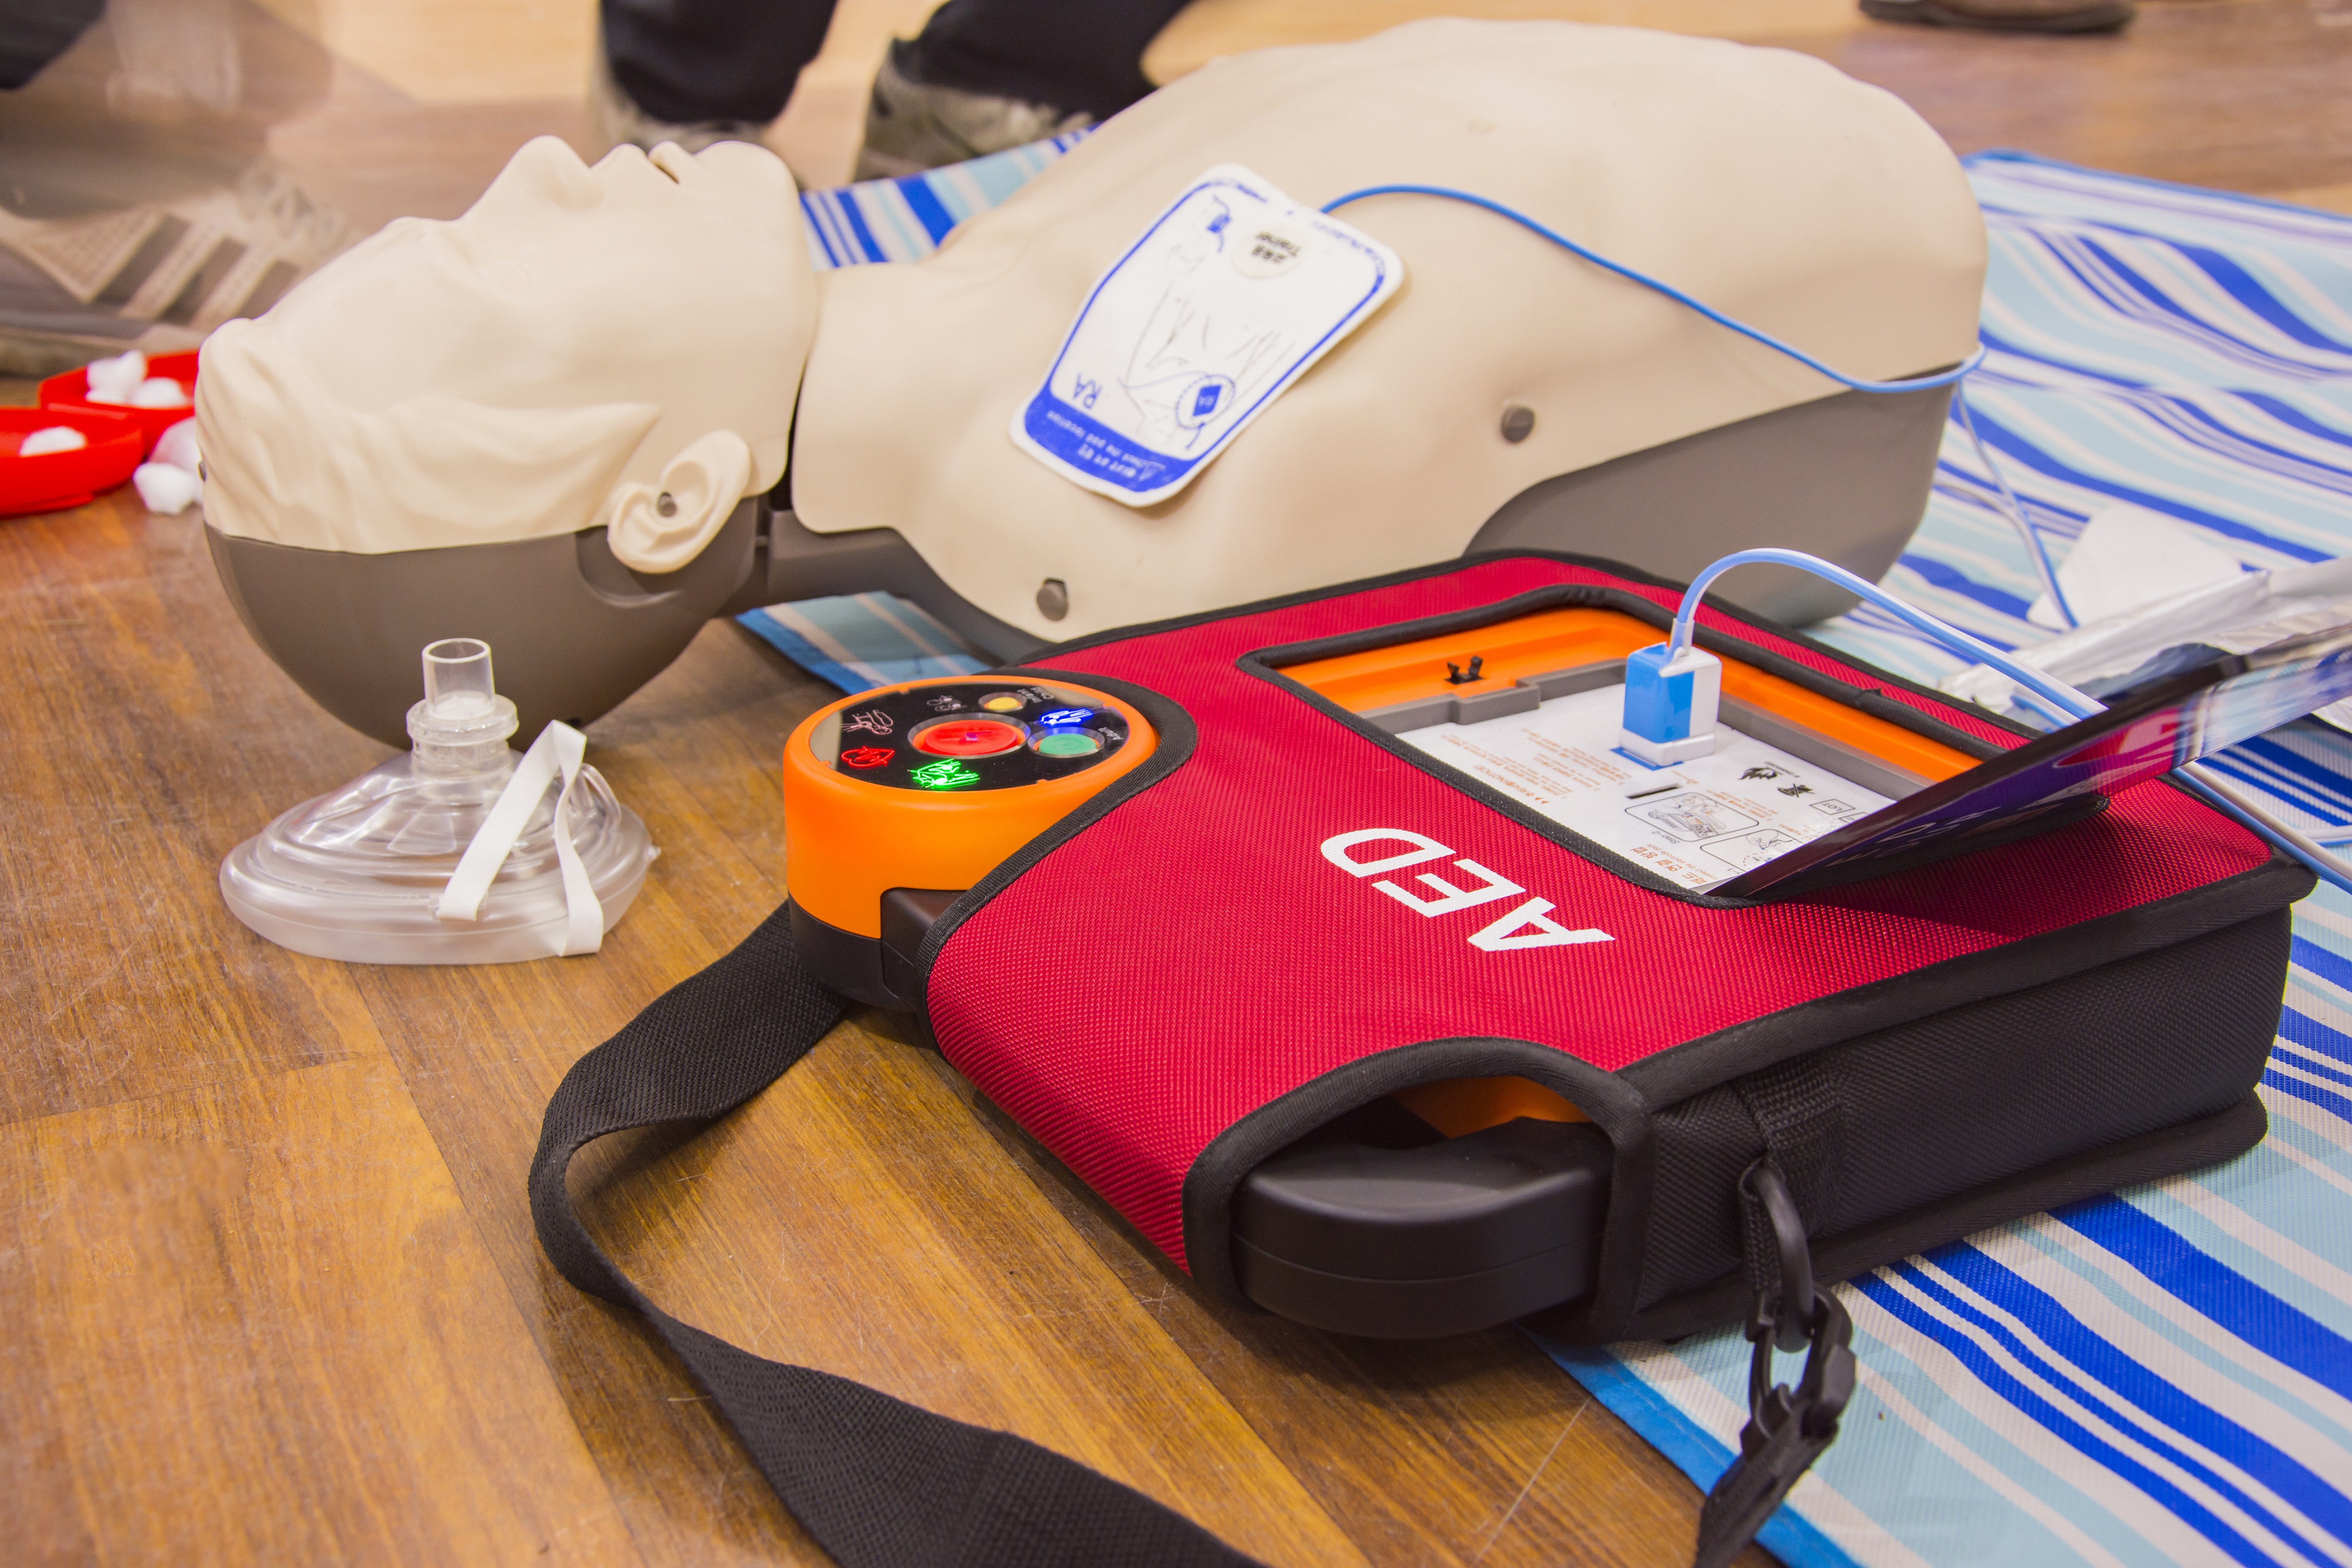 CPR AED First Aid Training Class May 7, 2022 in Salem